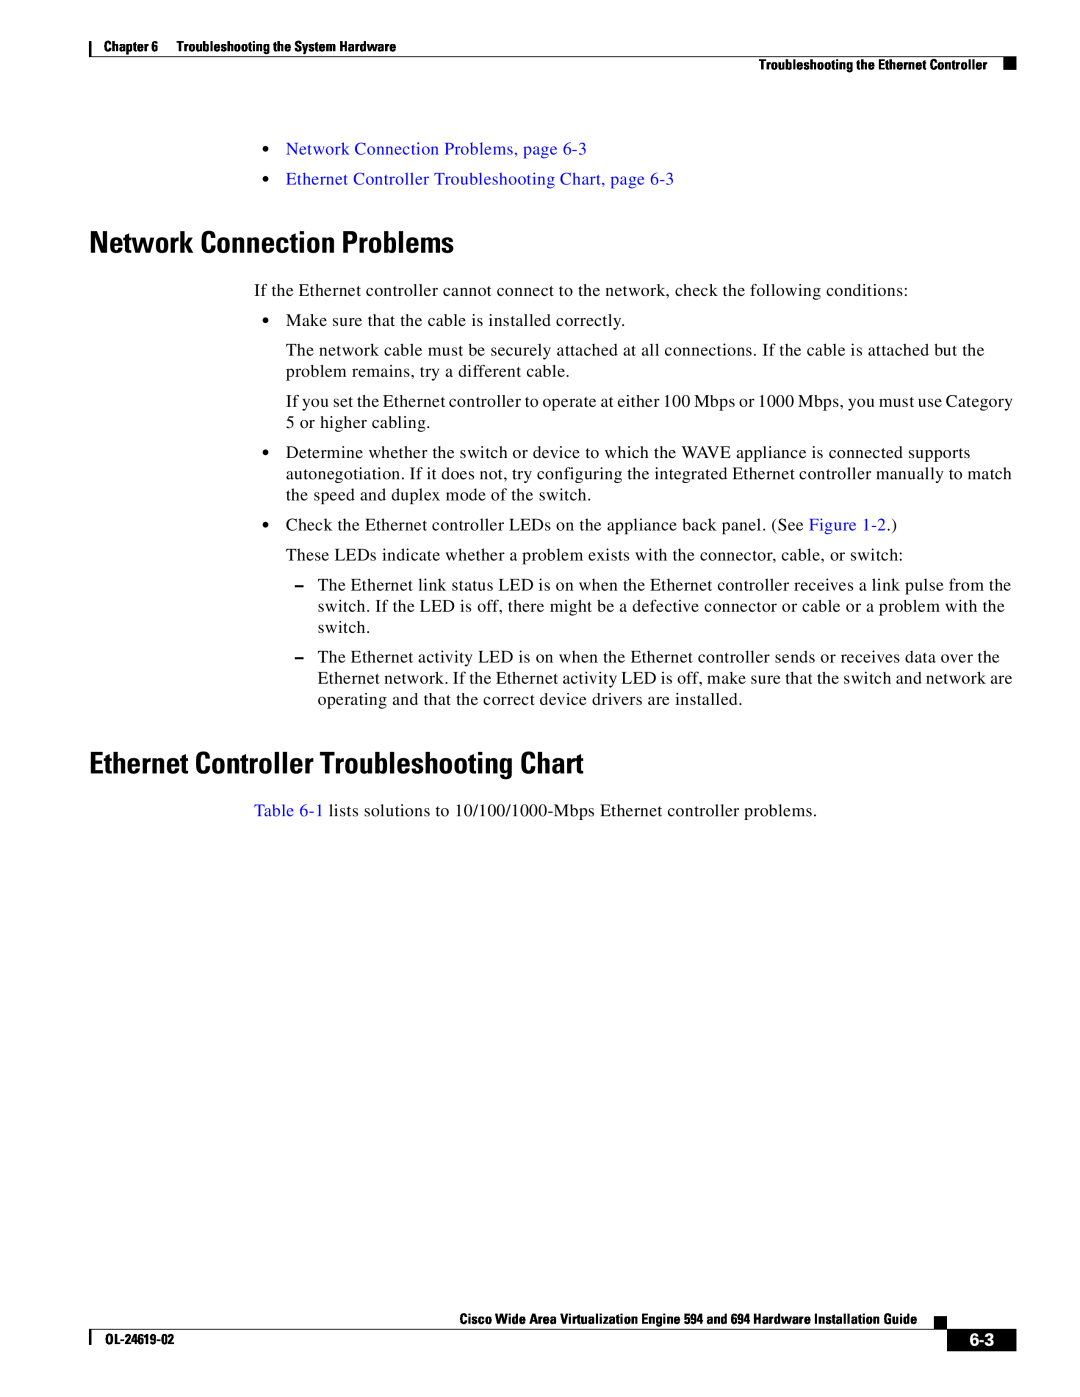 Cisco Systems 694, WAVE594K9 manual Network Connection Problems, Ethernet Controller Troubleshooting Chart 